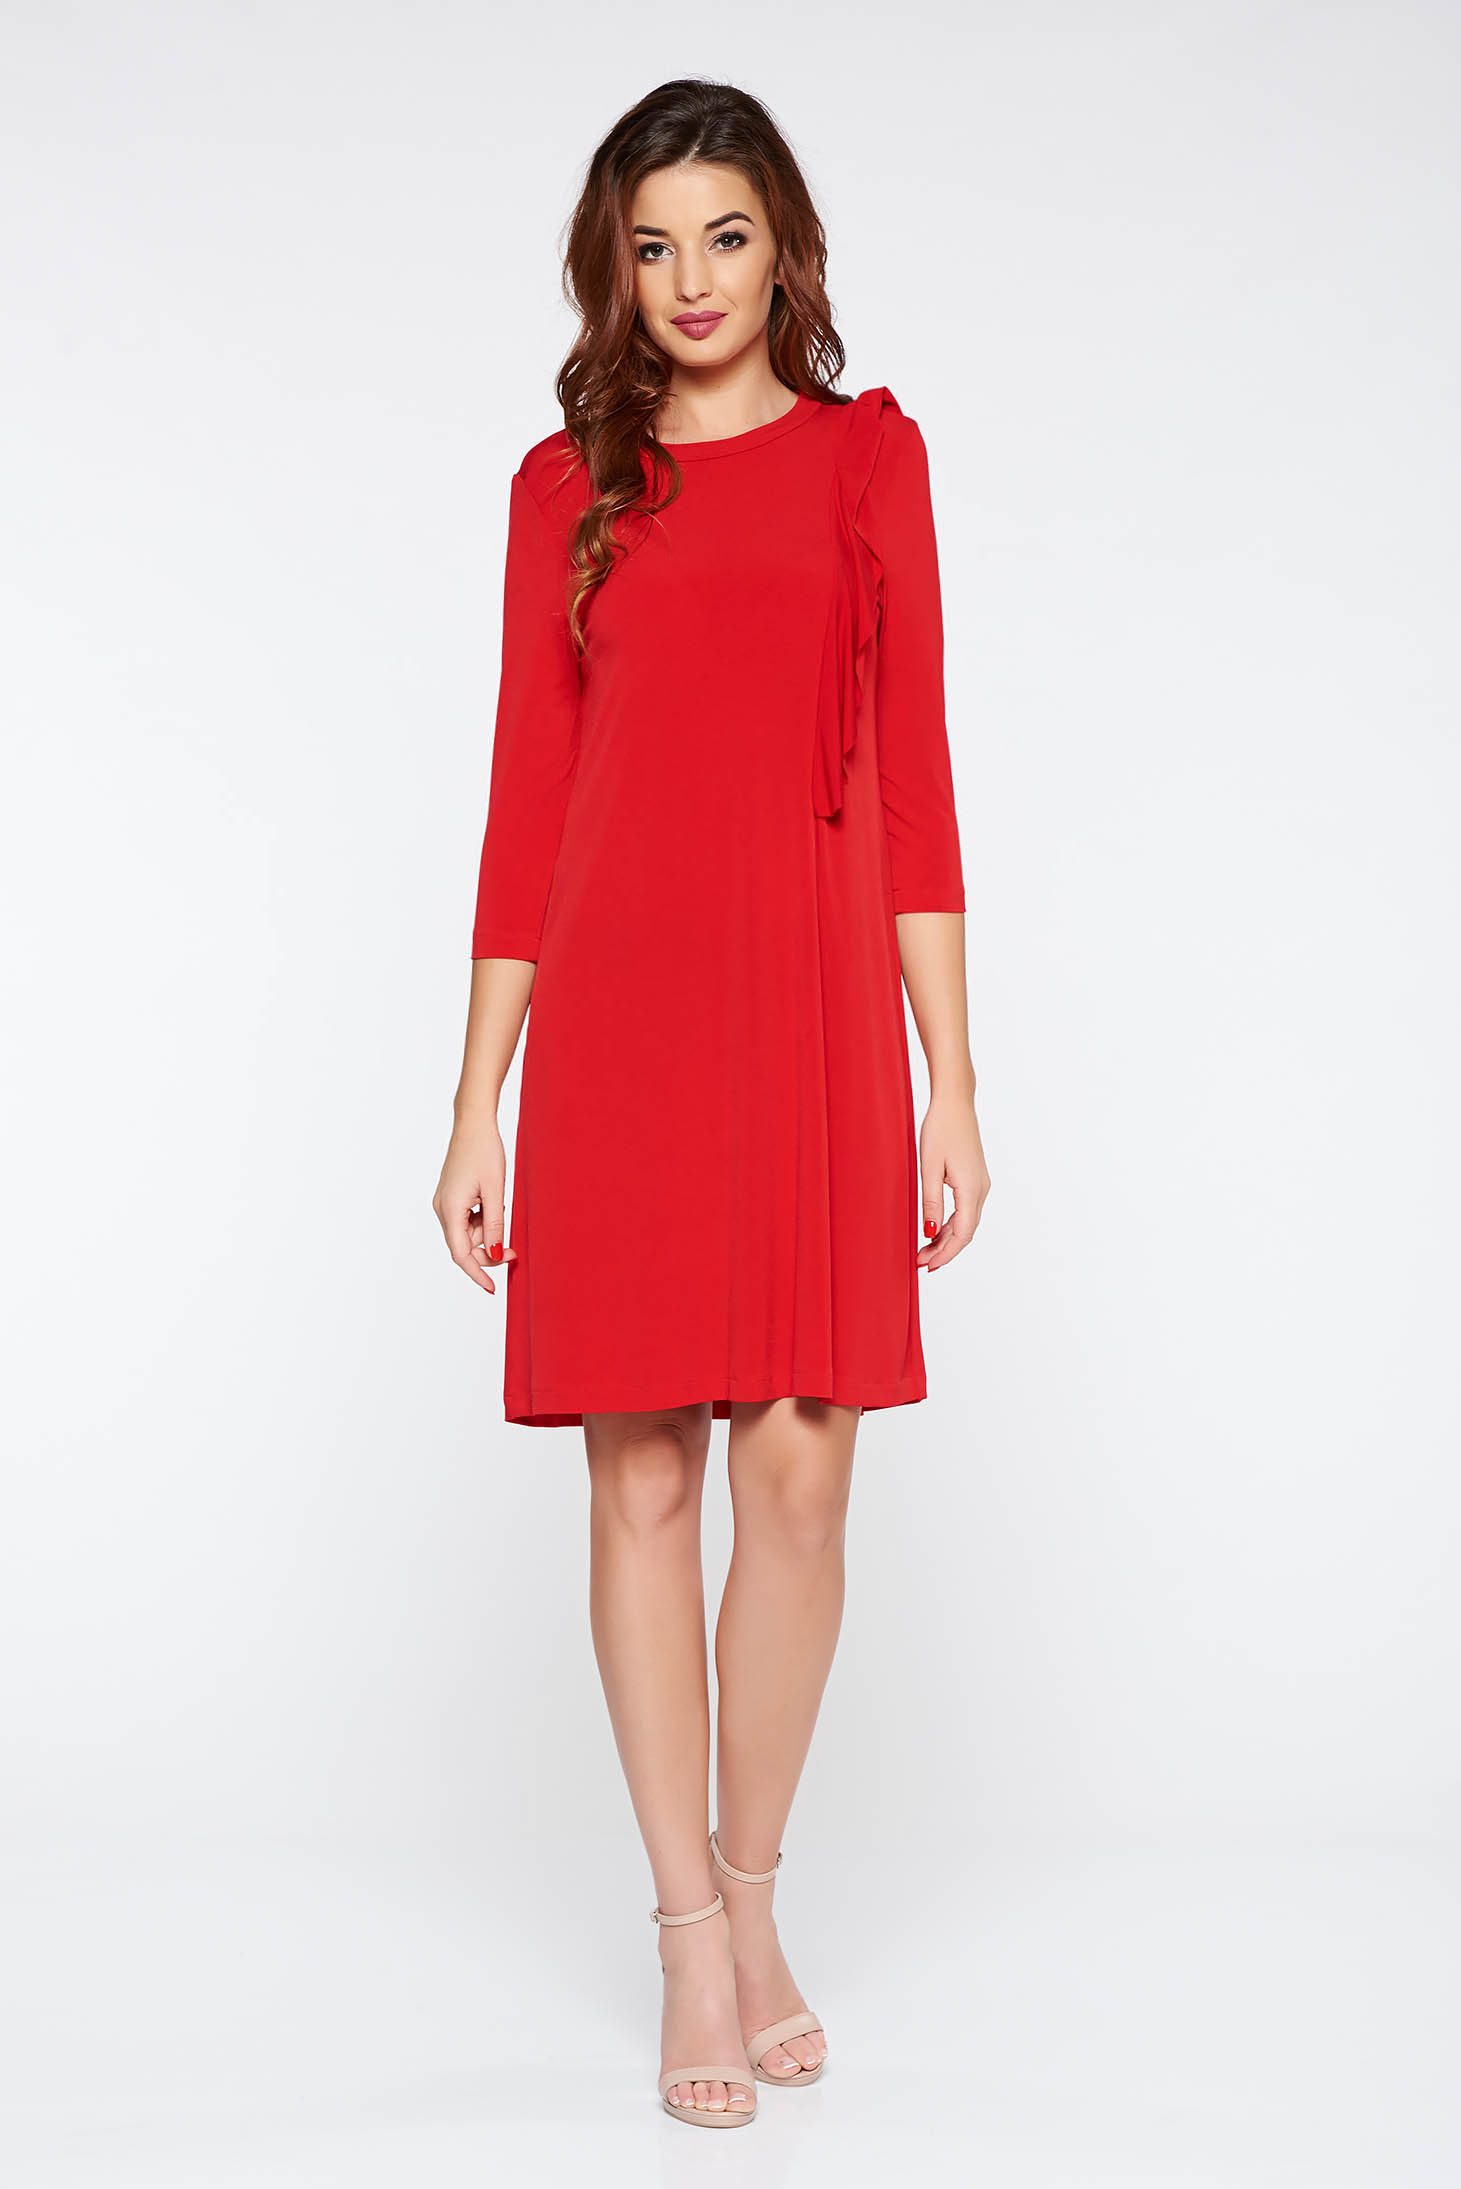 StarShinerS red dress casual flared airy fabric asymmetrical